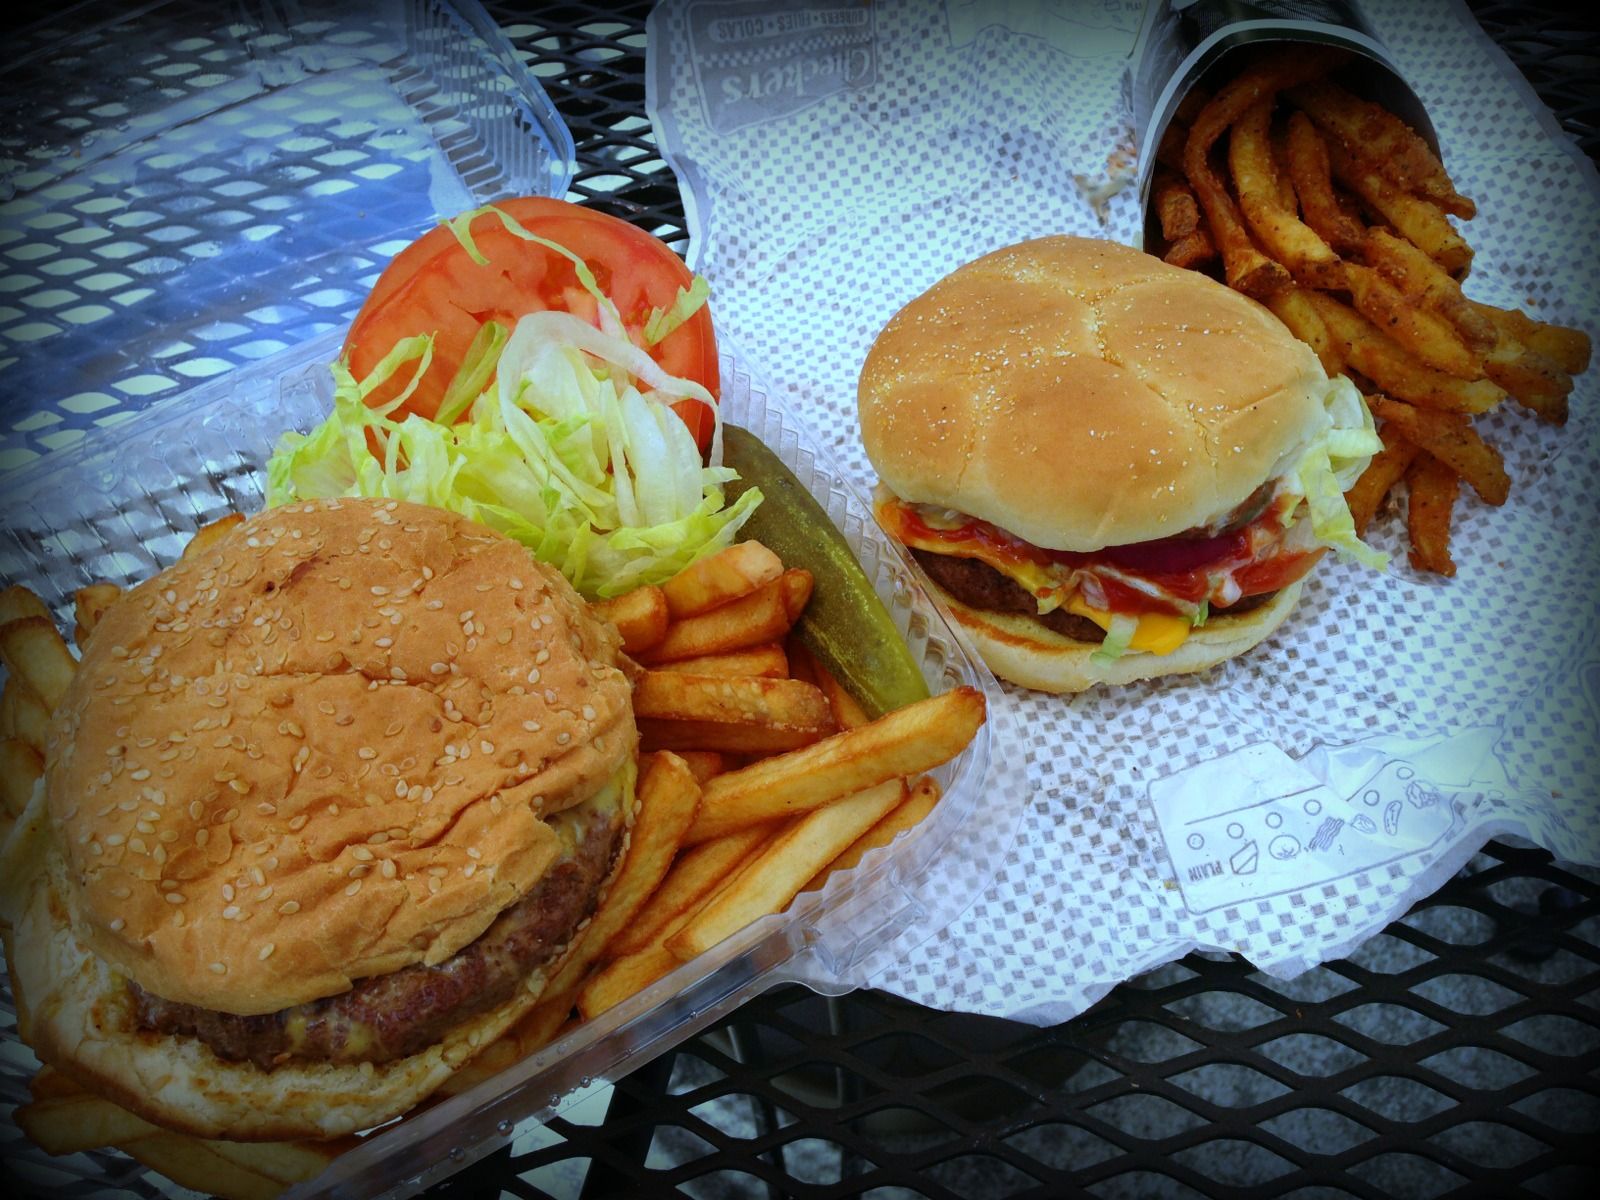 Burger And Fries Showdown: Checkers vs. Number One Deli